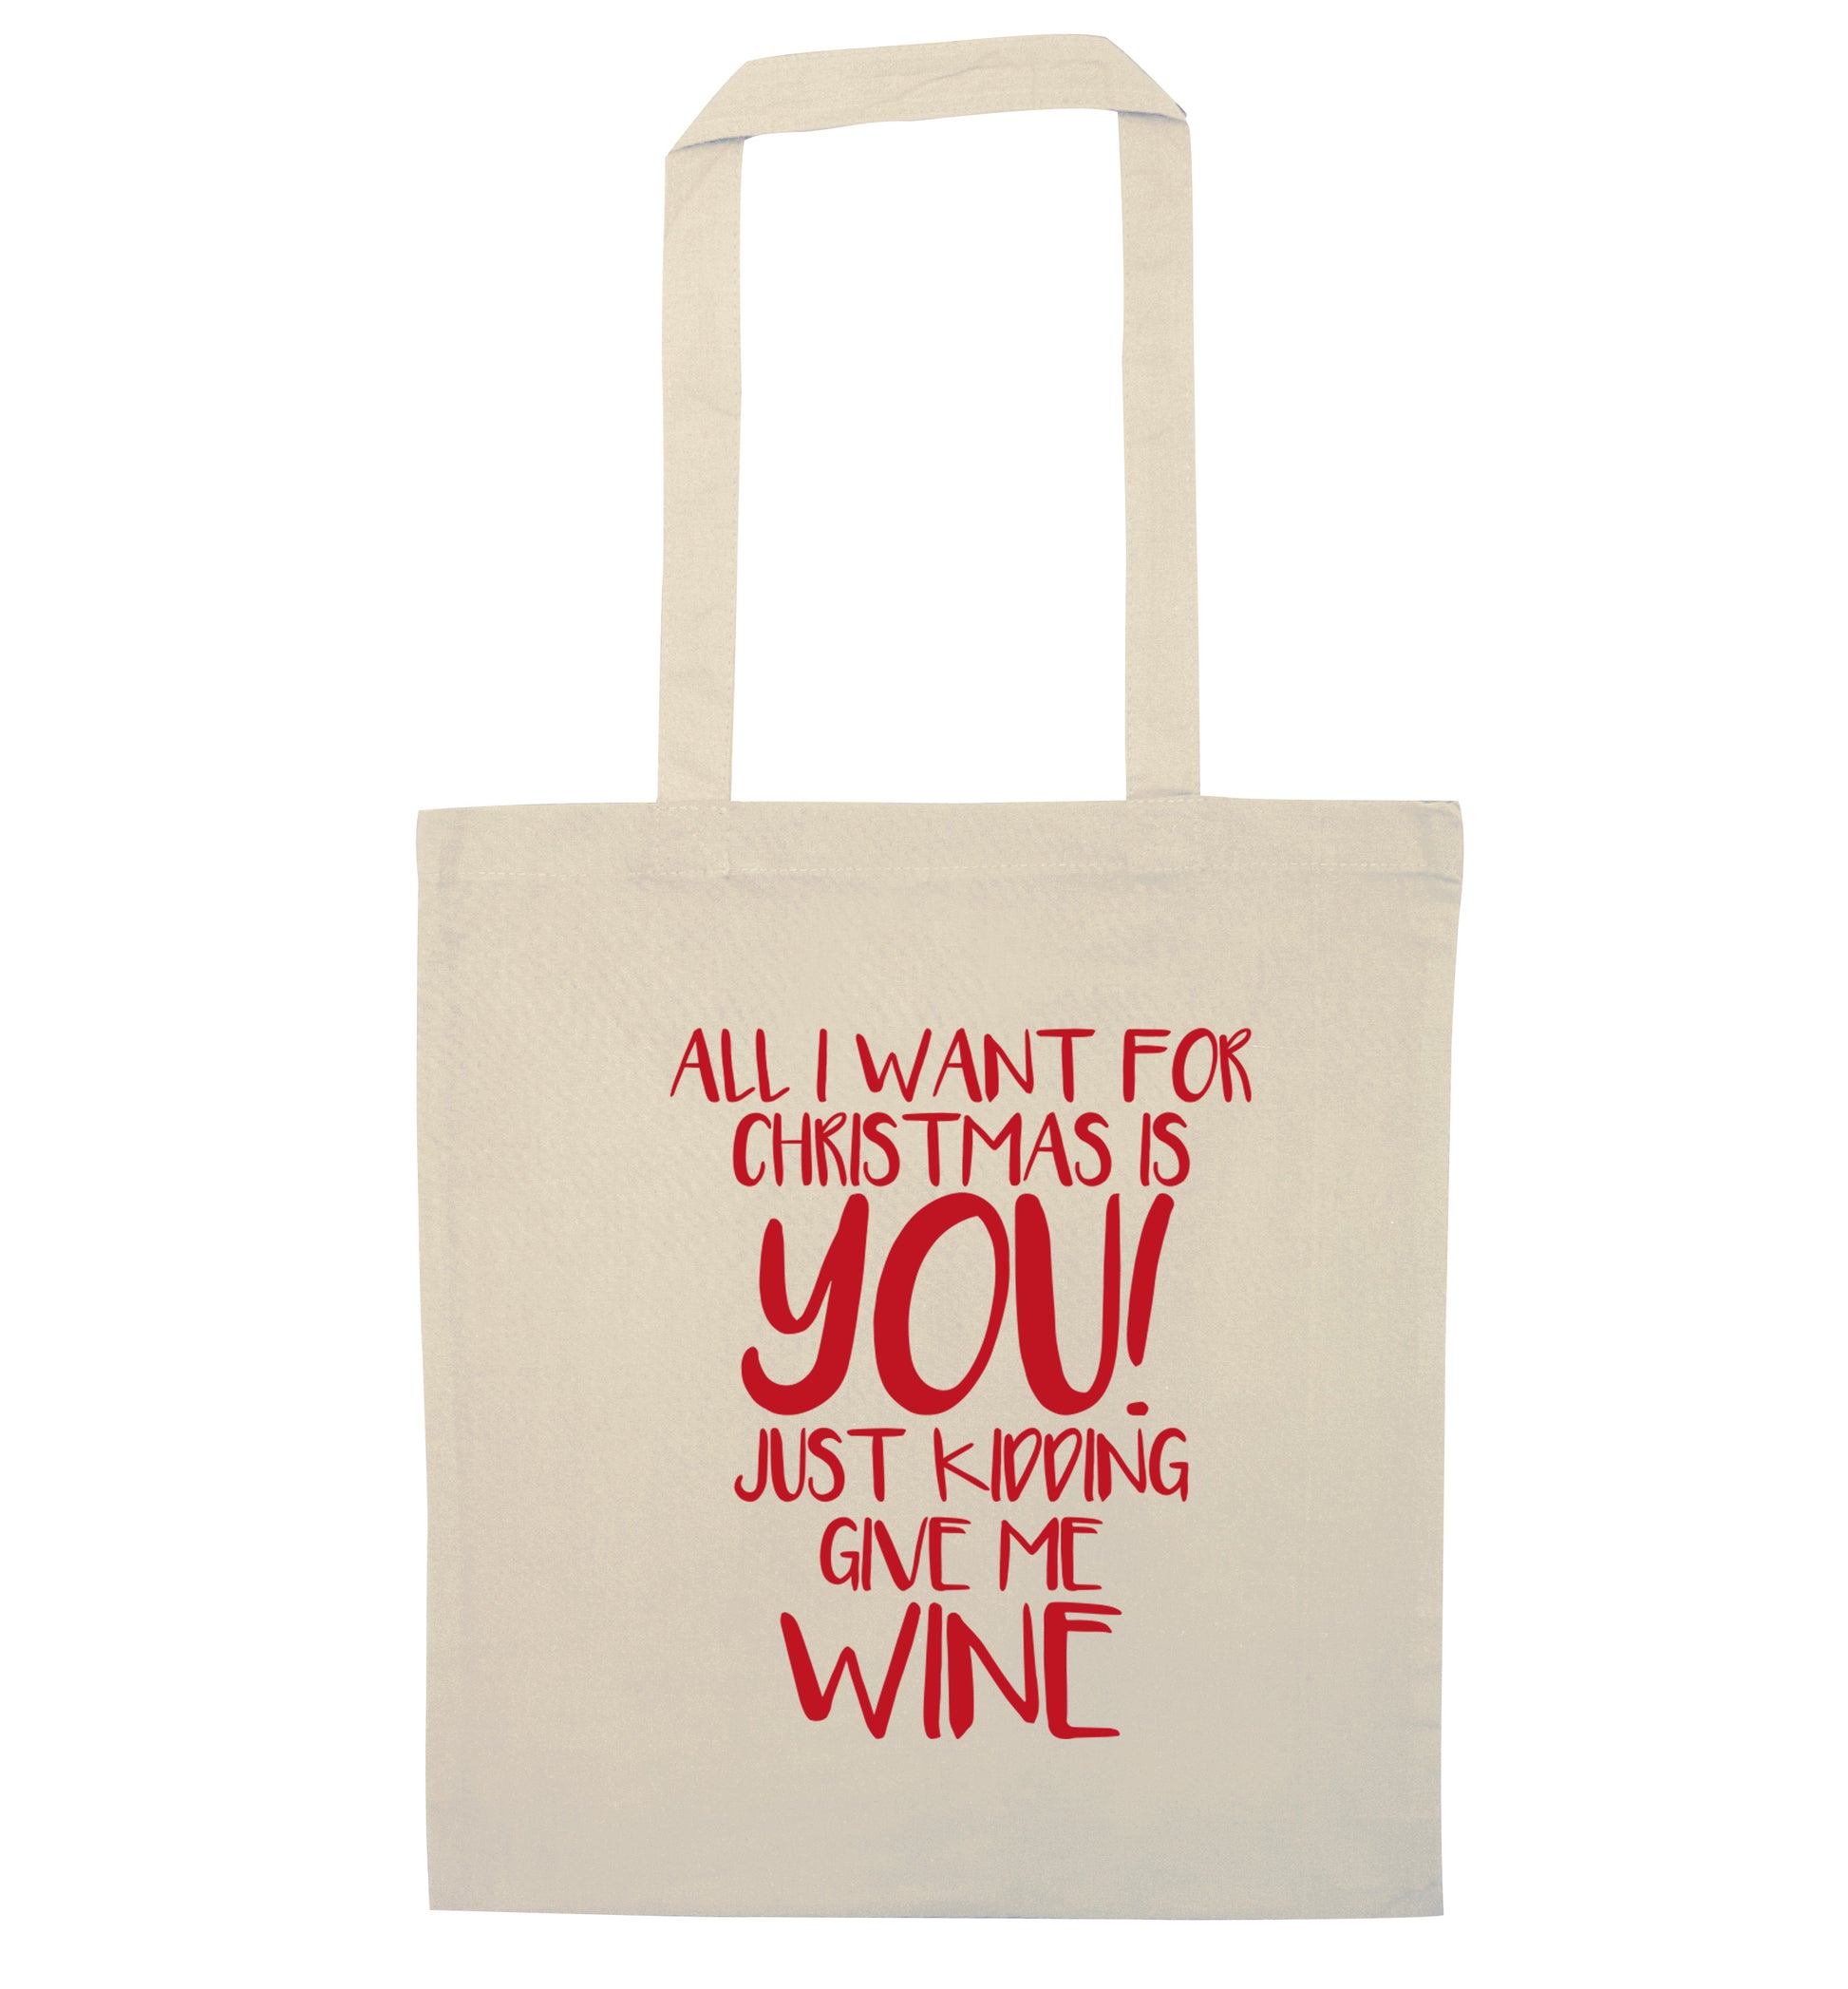 All I want for christmas is you just kidding give me the wine natural tote bag